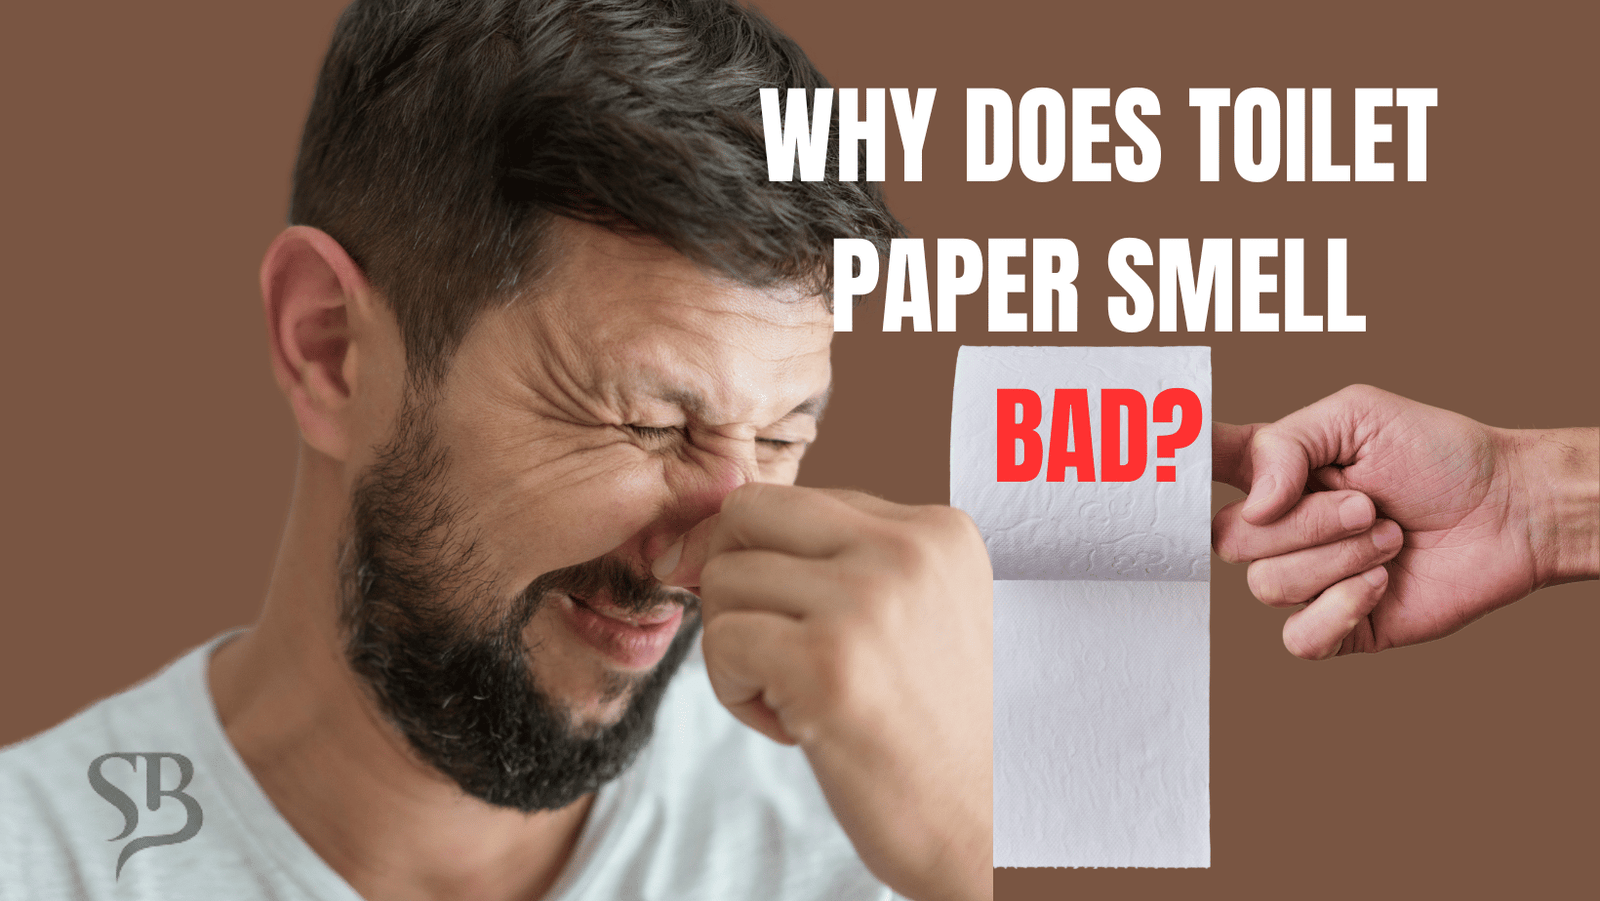 Why Does Toilet Paper Smell Bad?